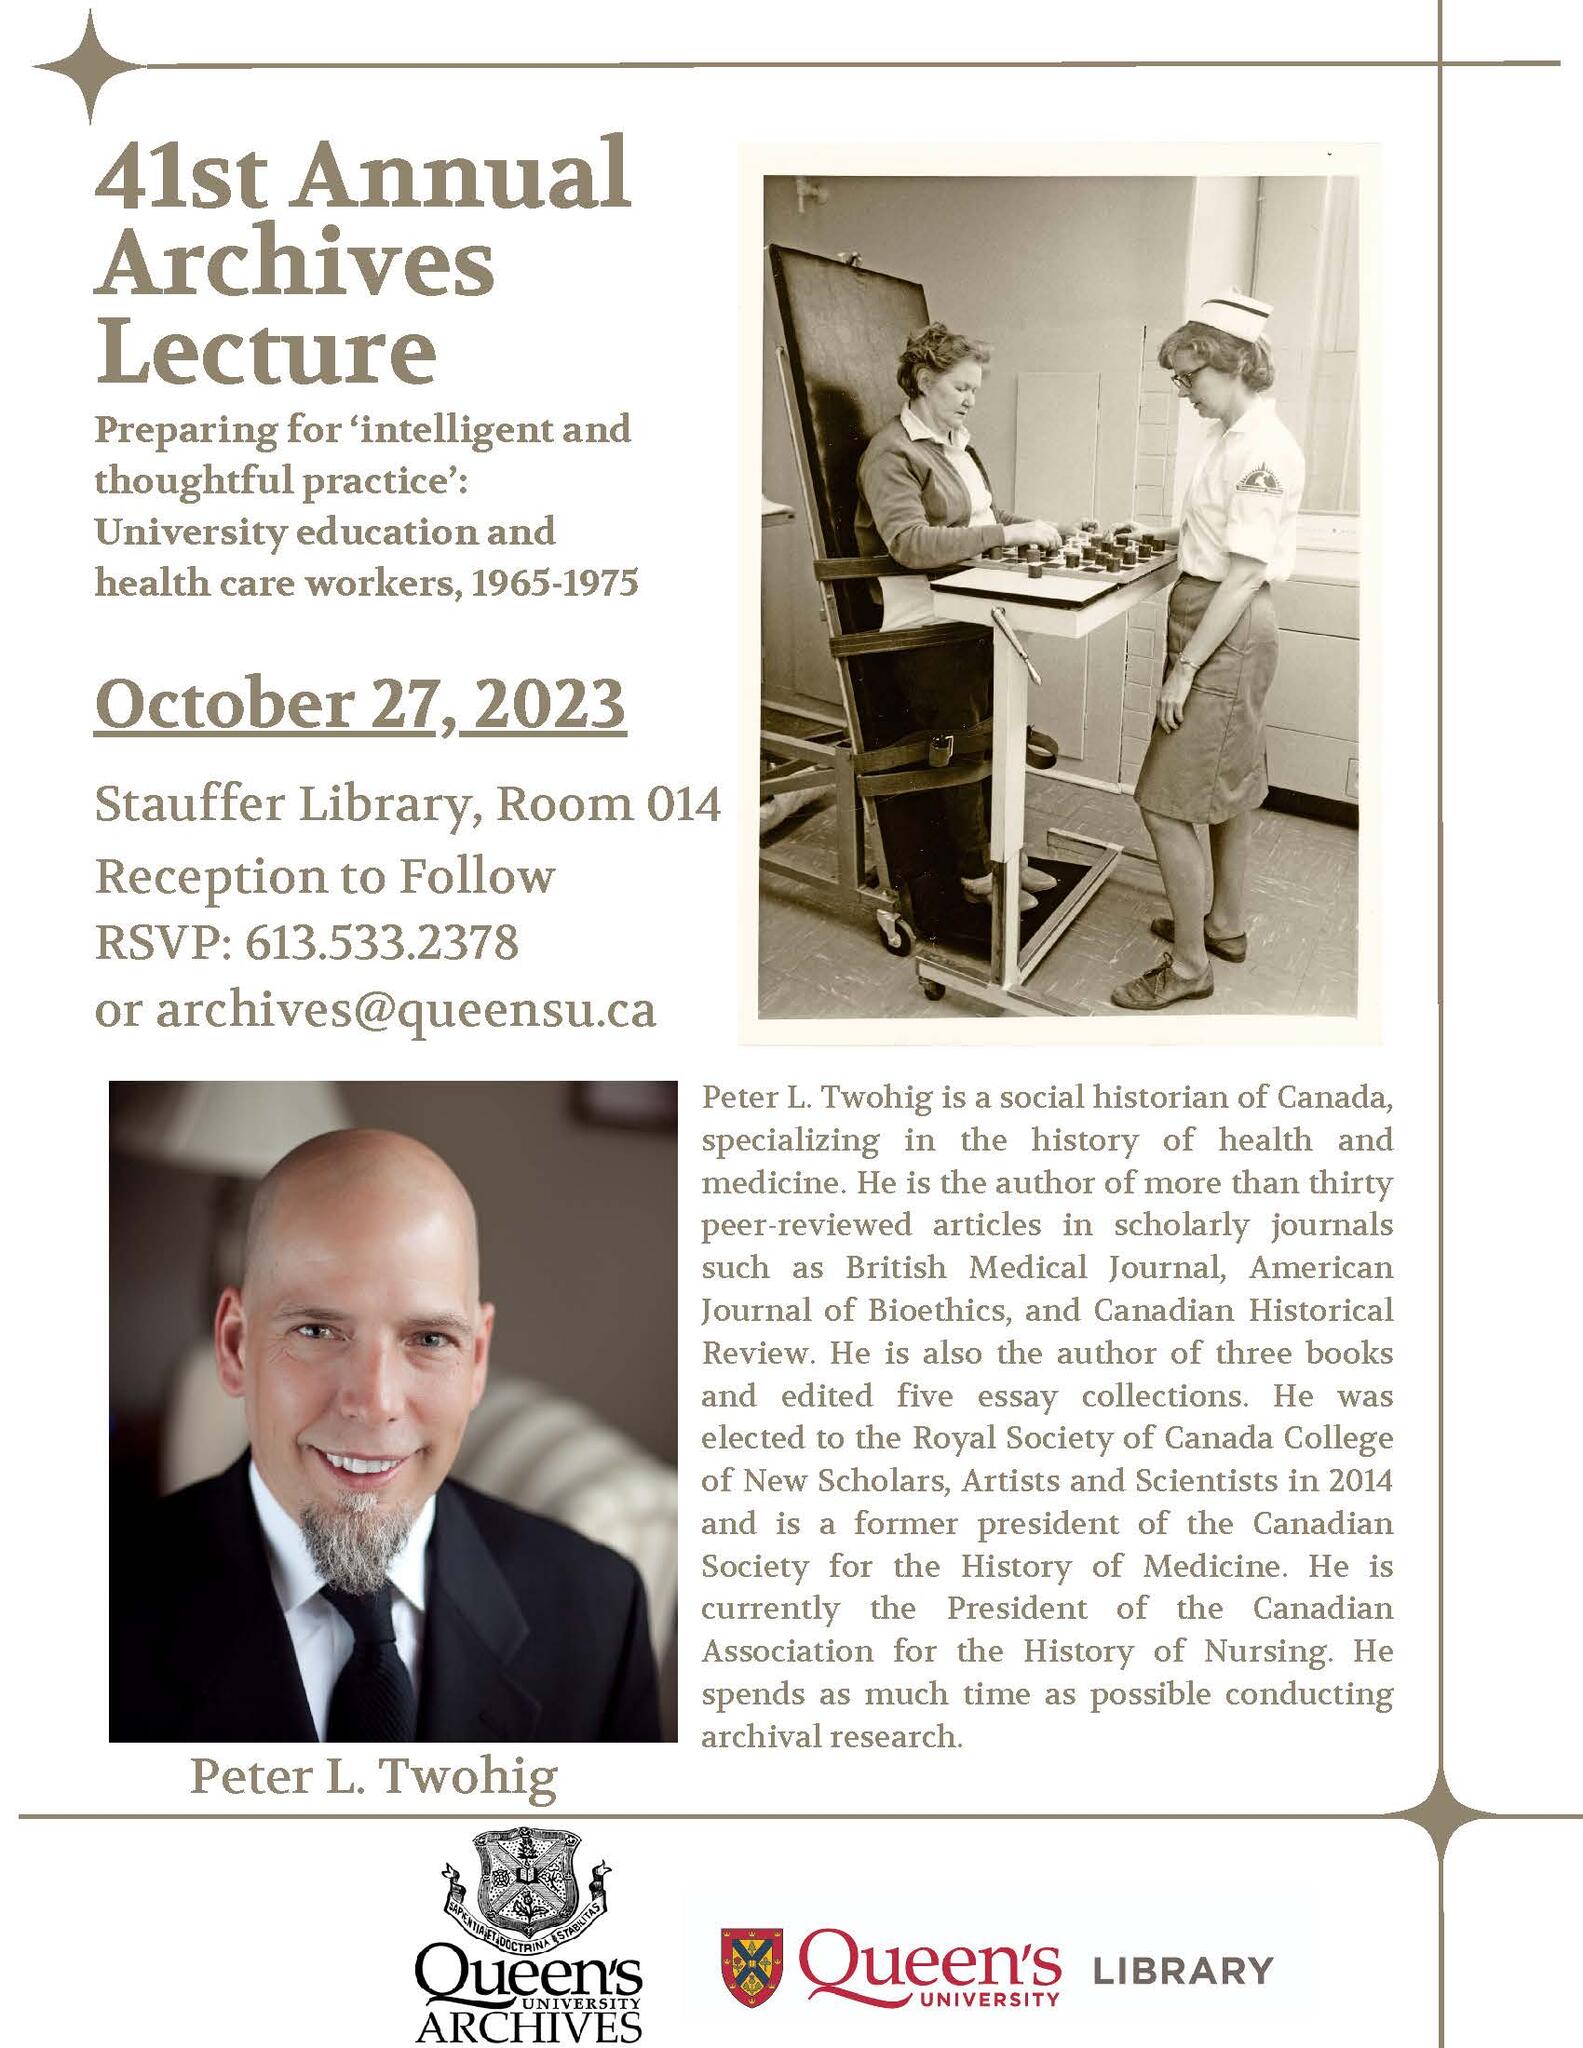 Poster advertising 41st Annual Archives Lecture